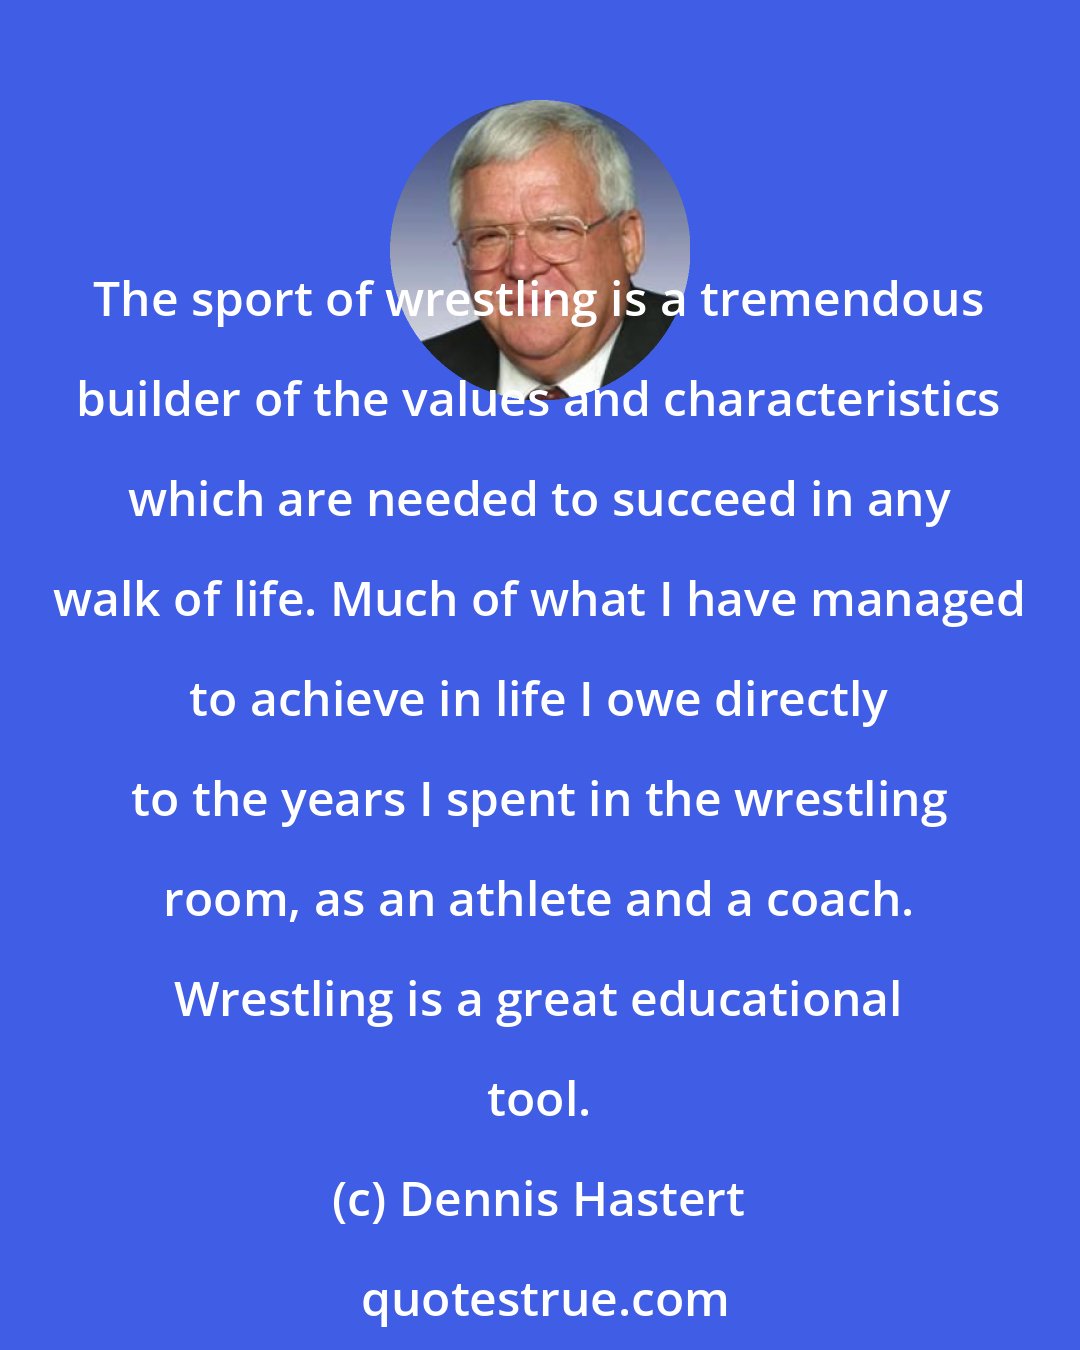 Dennis Hastert: The sport of wrestling is a tremendous builder of the values and characteristics which are needed to succeed in any walk of life. Much of what I have managed to achieve in life I owe directly to the years I spent in the wrestling room, as an athlete and a coach. Wrestling is a great educational tool.